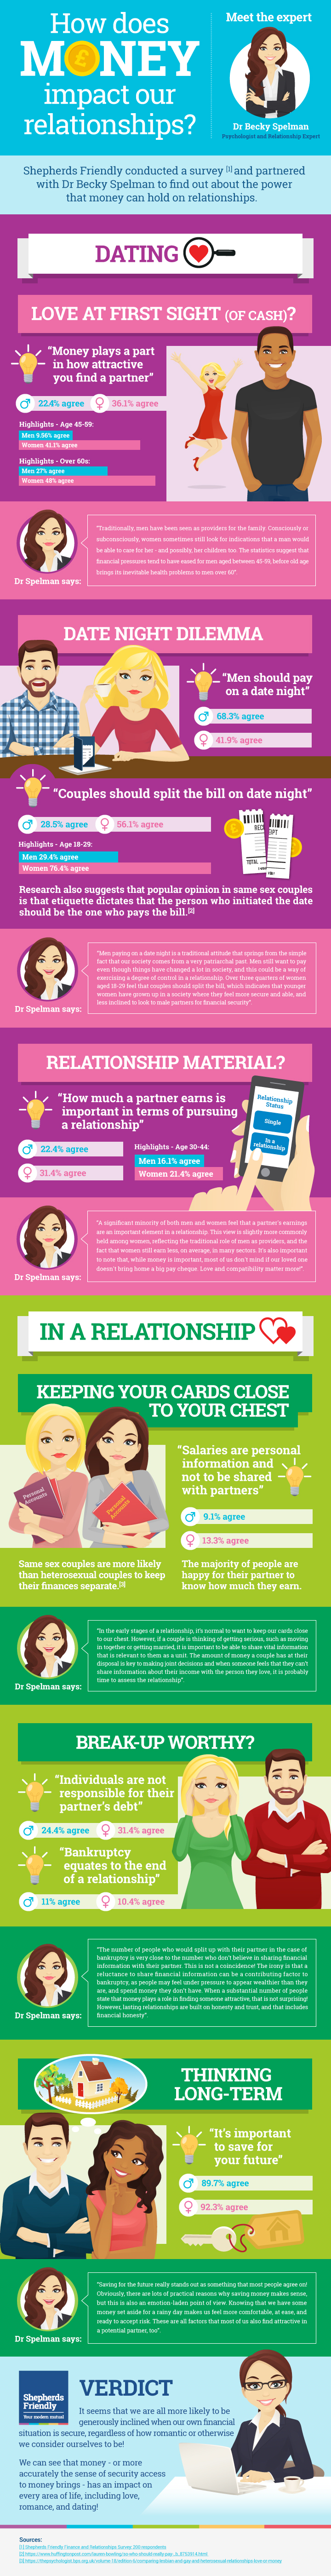 Can Money Buy Love? How Money Impacts Relationships - Infographic